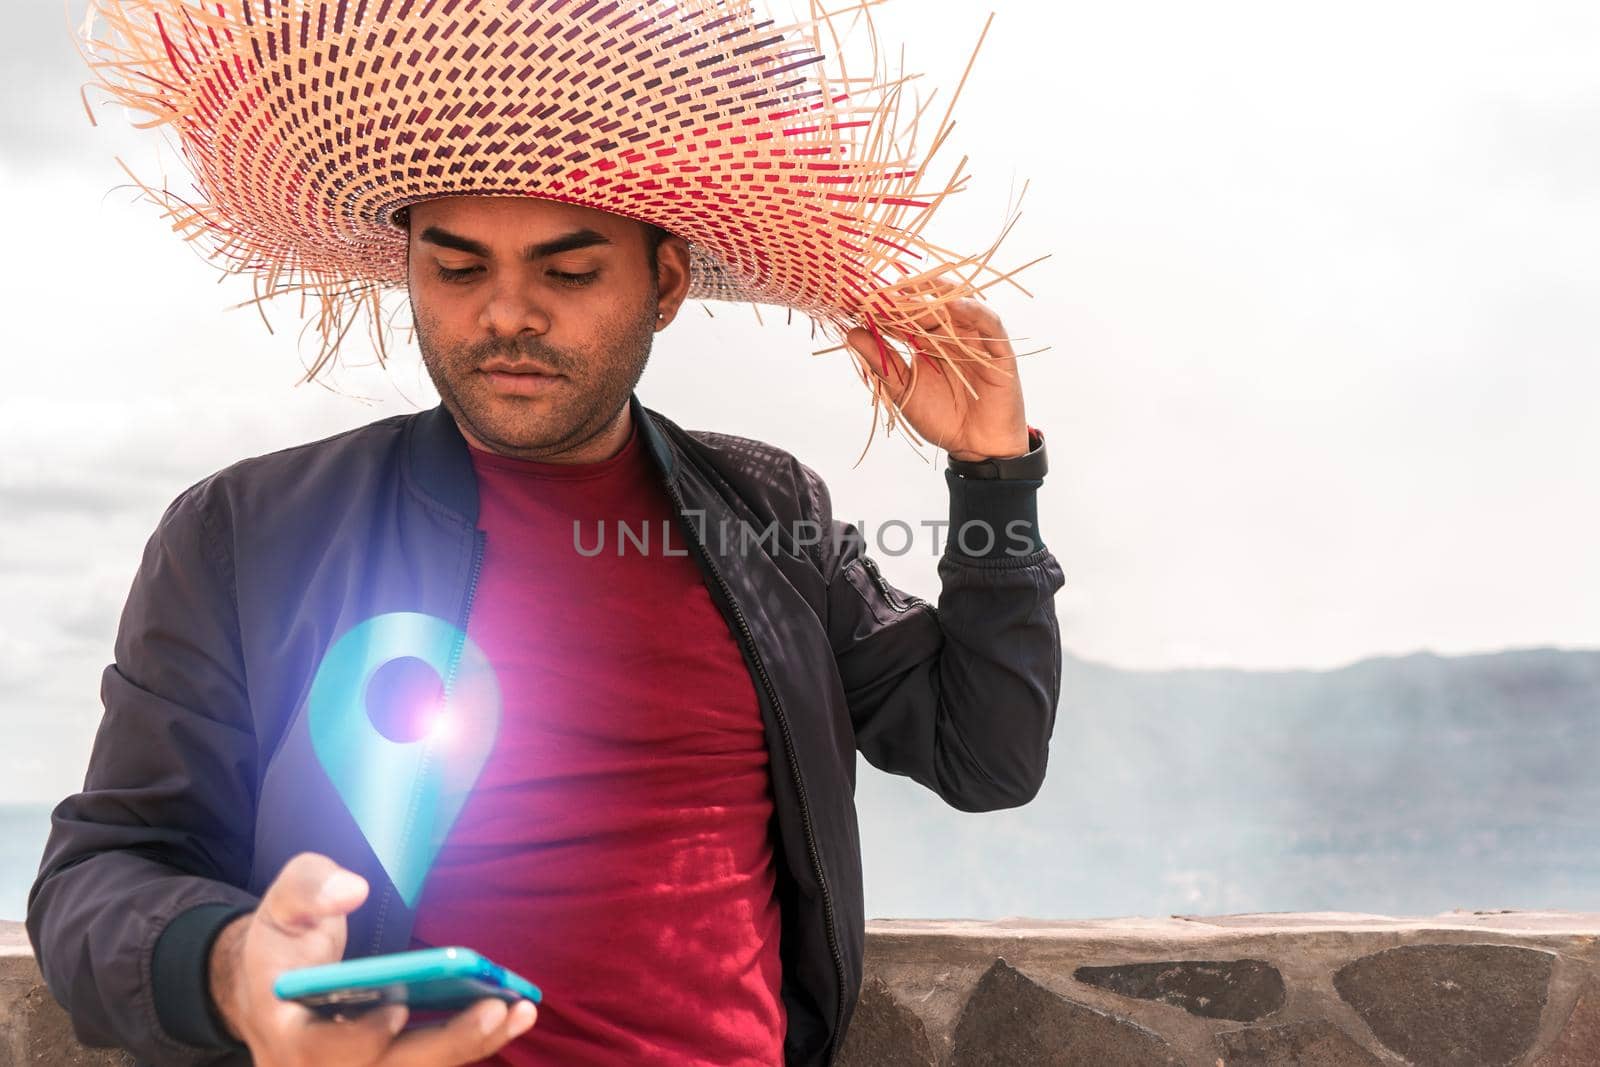 Latin man with striking hat searching for a location on his cell phone during an adventure trip in a volcano by cfalvarez